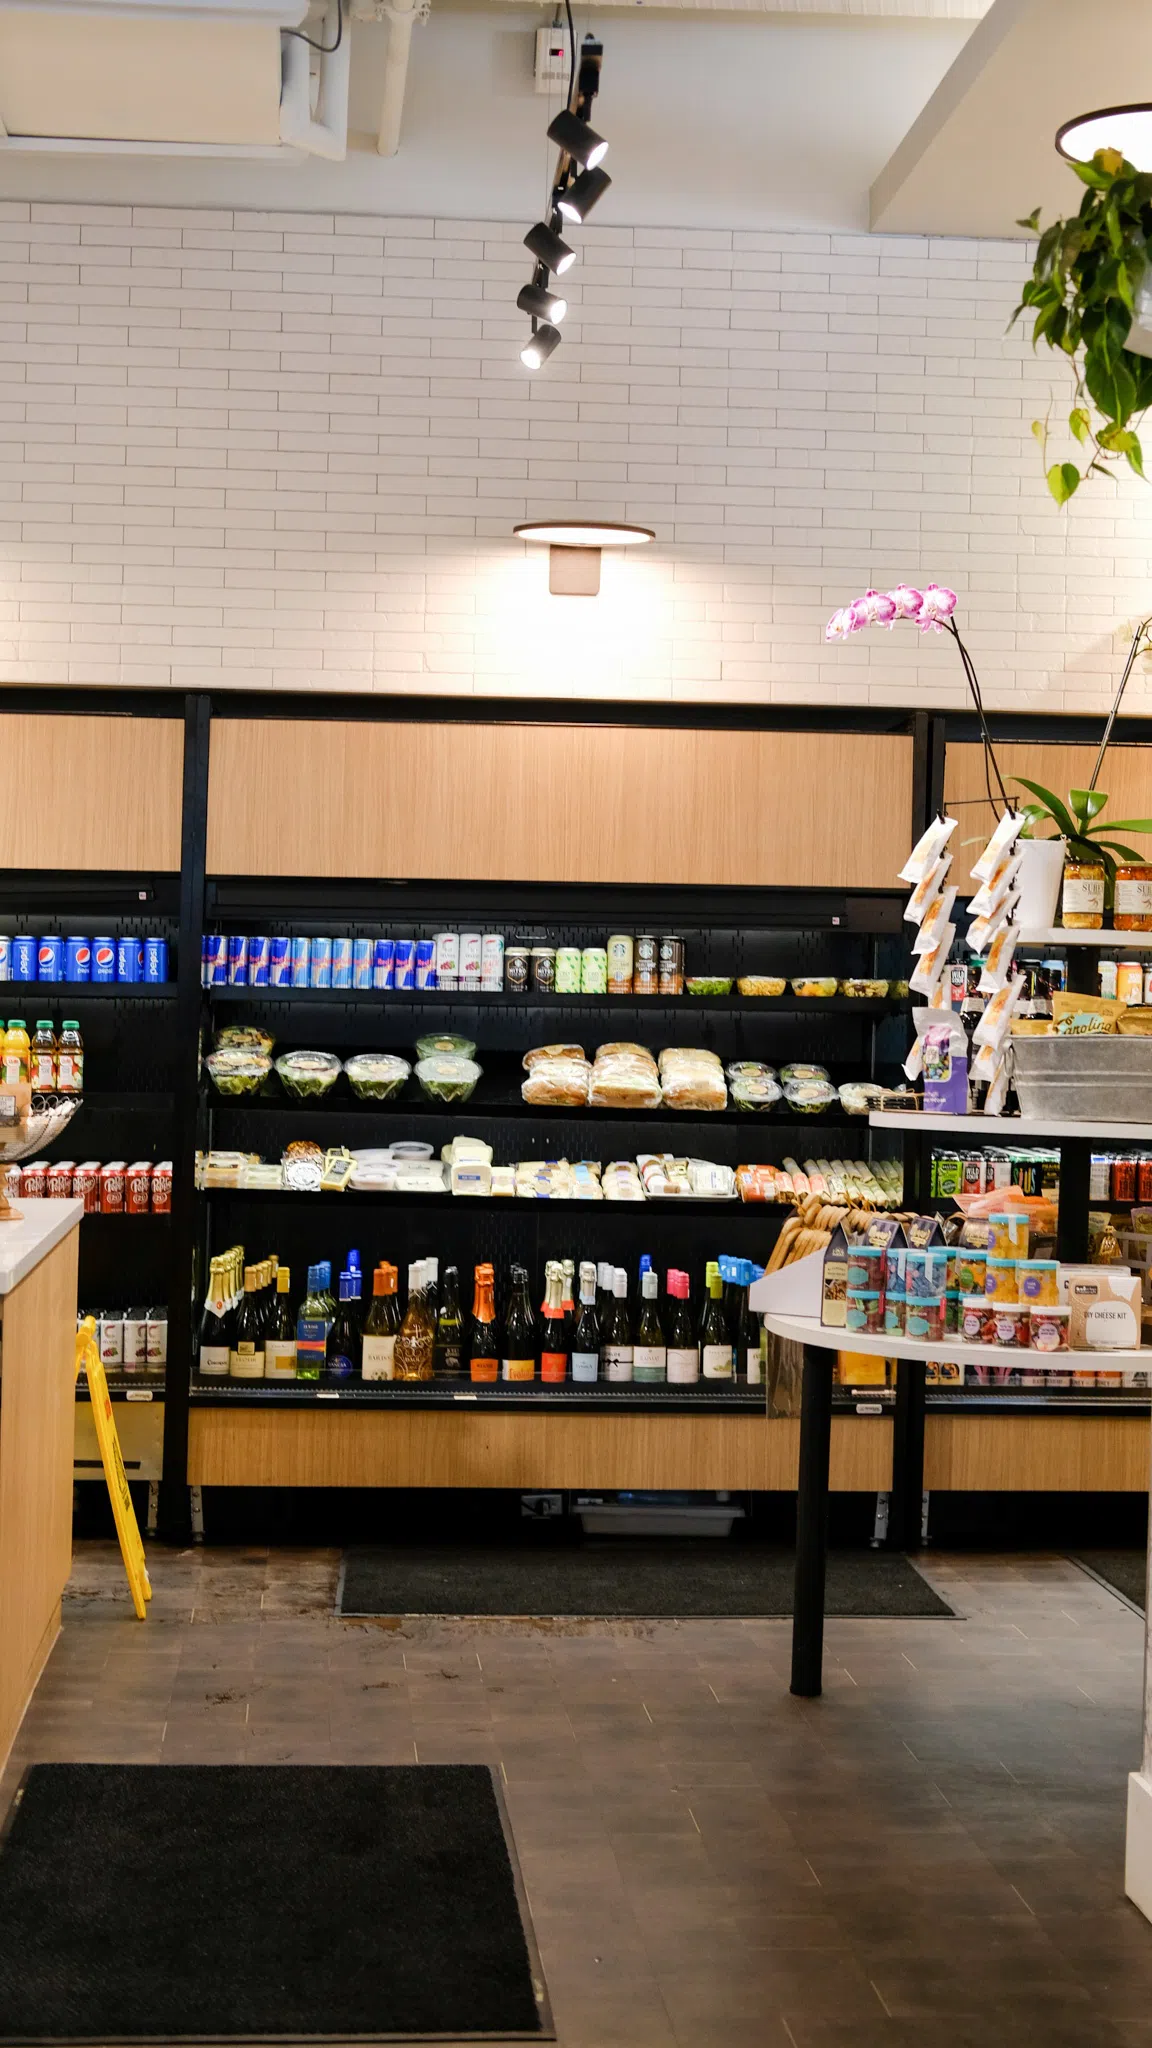 A refrigerated wall with quick, takeaway food options, energy drinks, alcoholic beverages, and desserts.